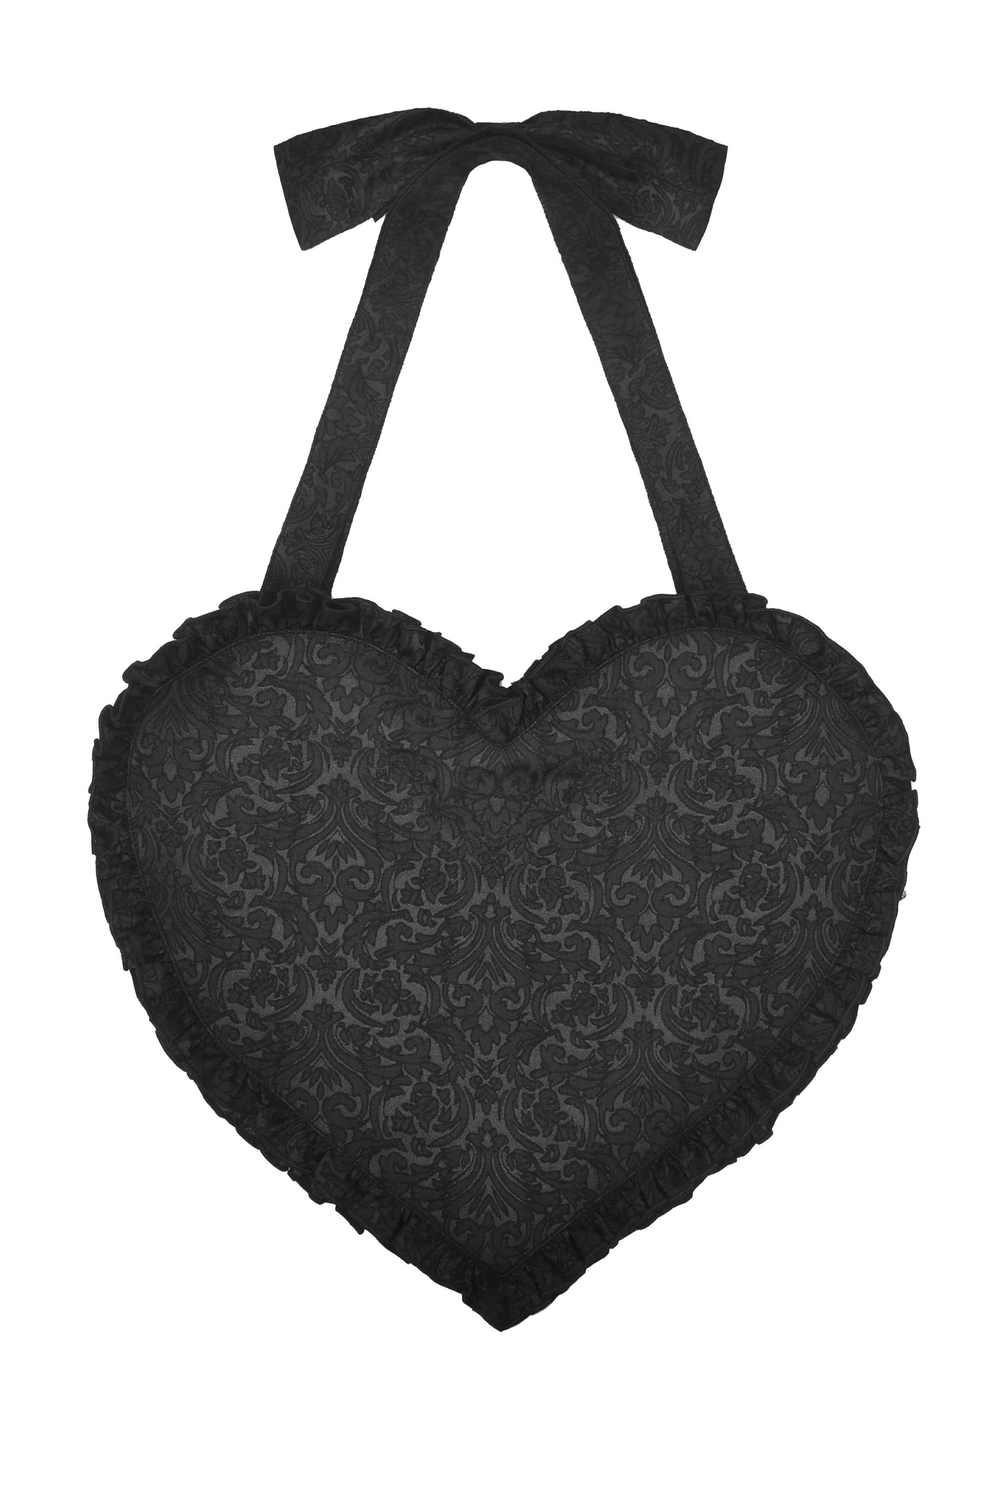 Gothic Women's Heart Shoulder Bag with Cross Detail